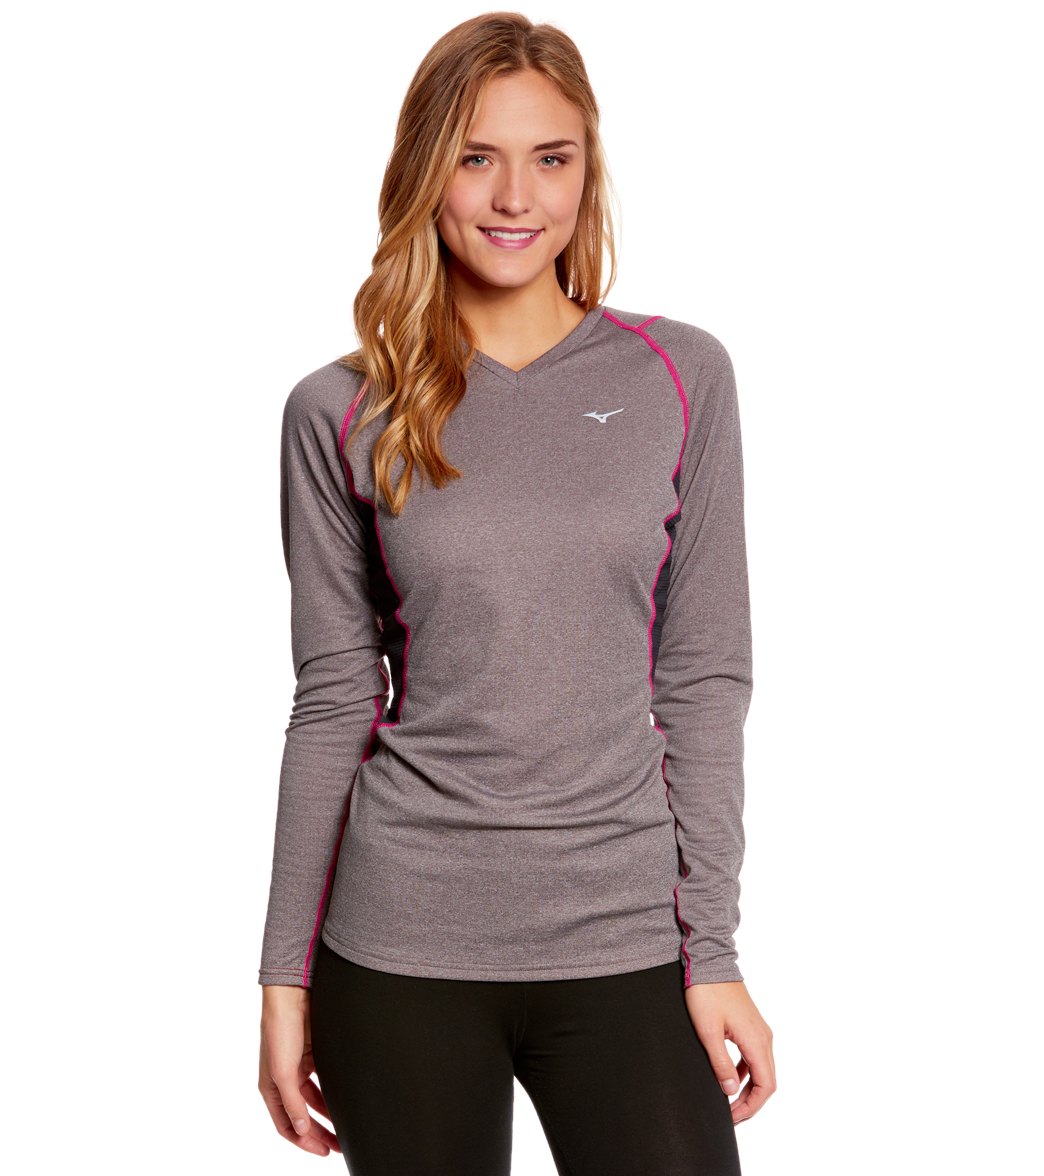 Mizuno Women's Breath Thermo Wool V-Neck Running Top - Fine Grey/Beetroot Large - Swimoutlet.com